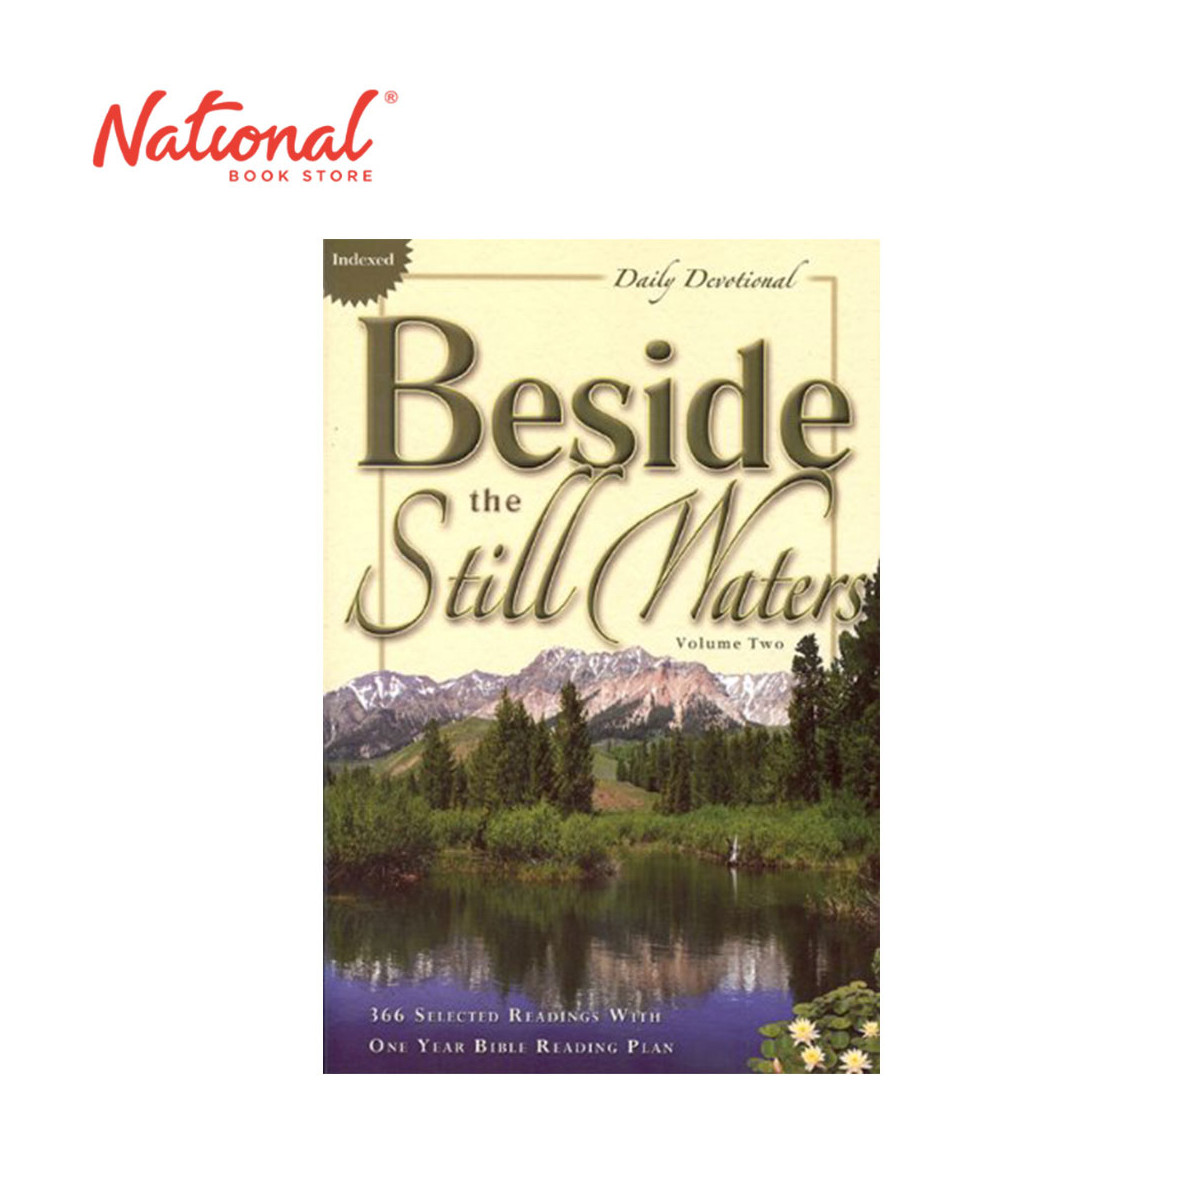 Beside The Still Waters Volume 2 by Various Authors - Trade Paperback - Prayers & Devotionals